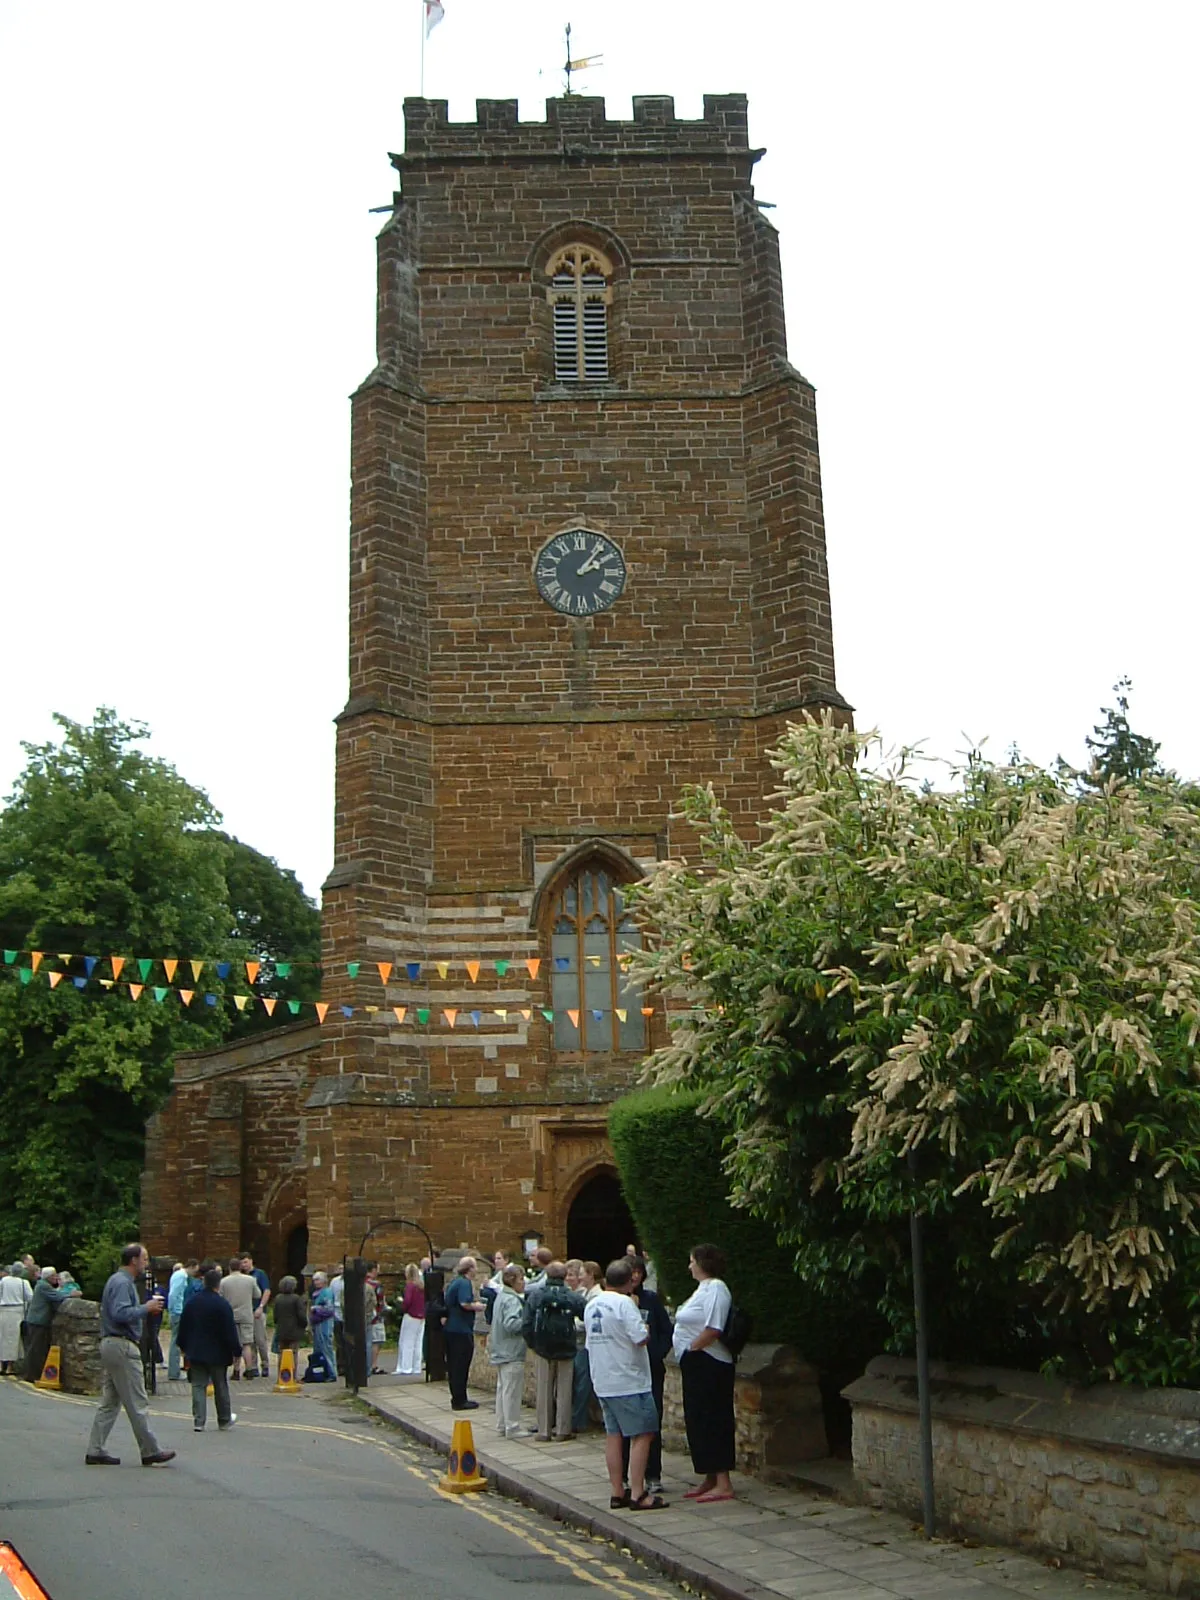 Photo showing: St Lawrence's church Towcester.
Taken by James@hopgrove, June 2005.